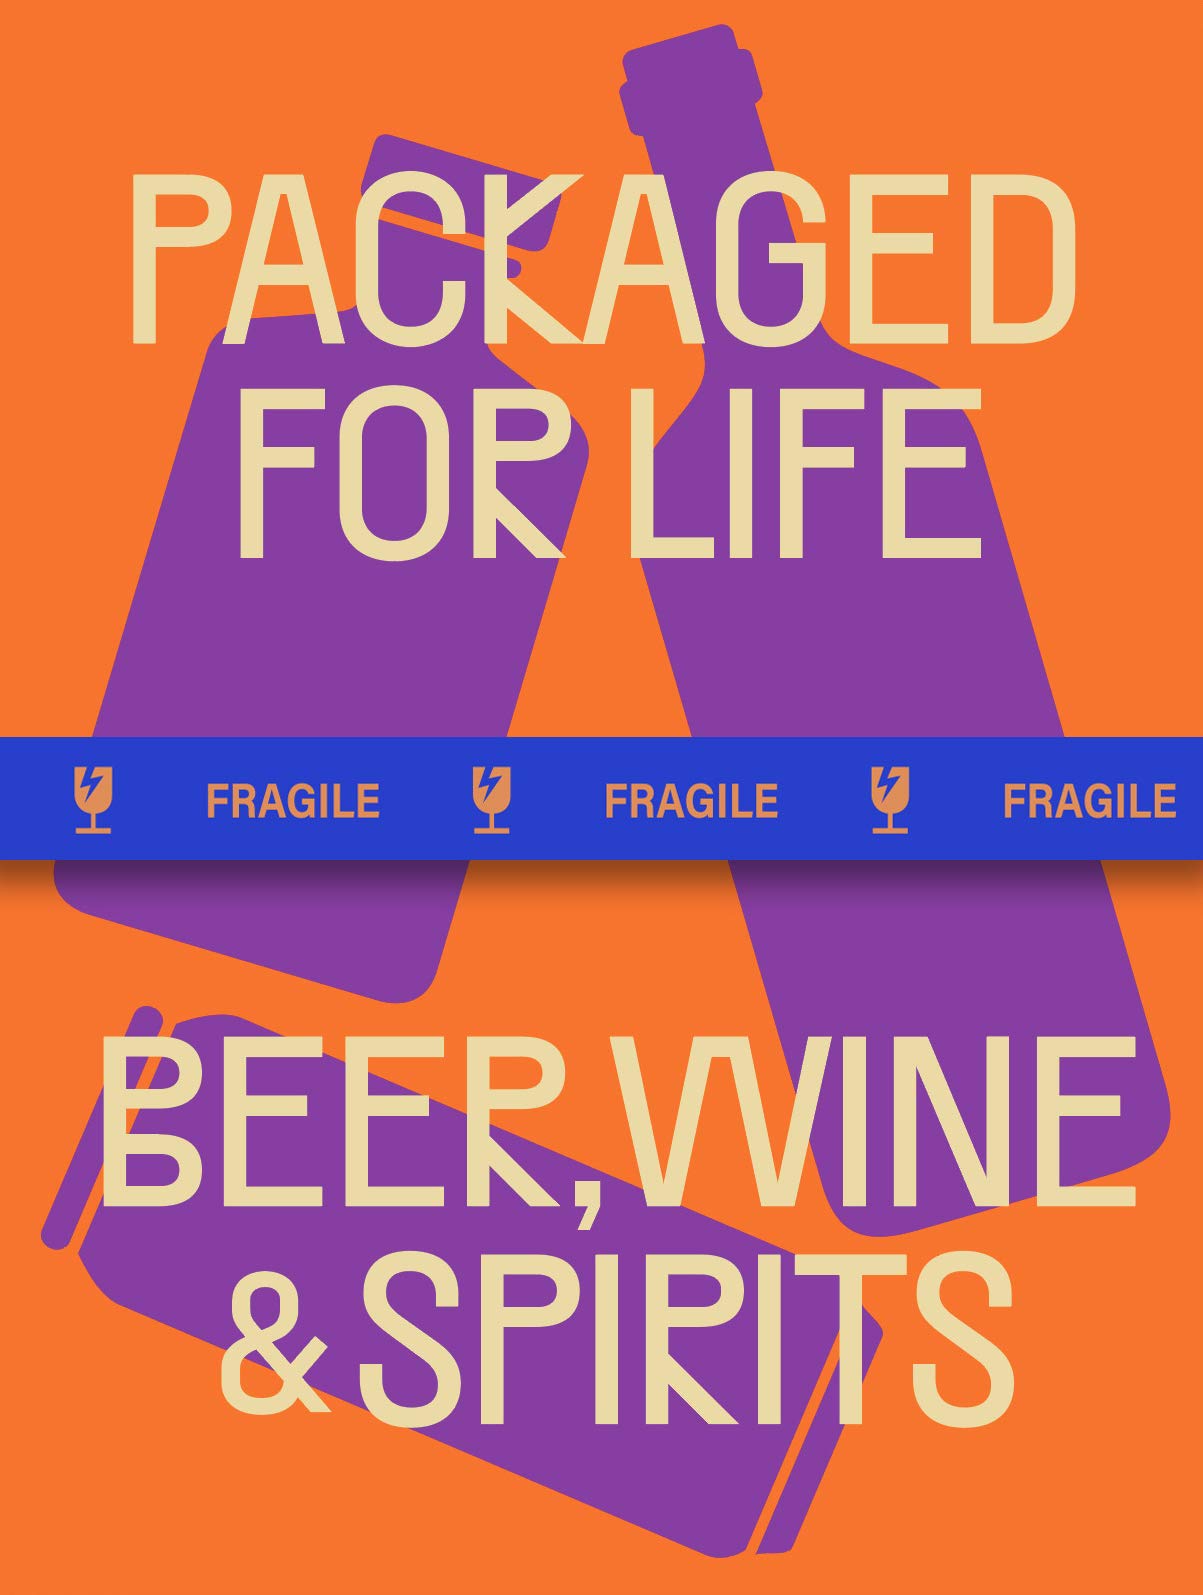 Packaged for Life: Beer, Wine and Spirits